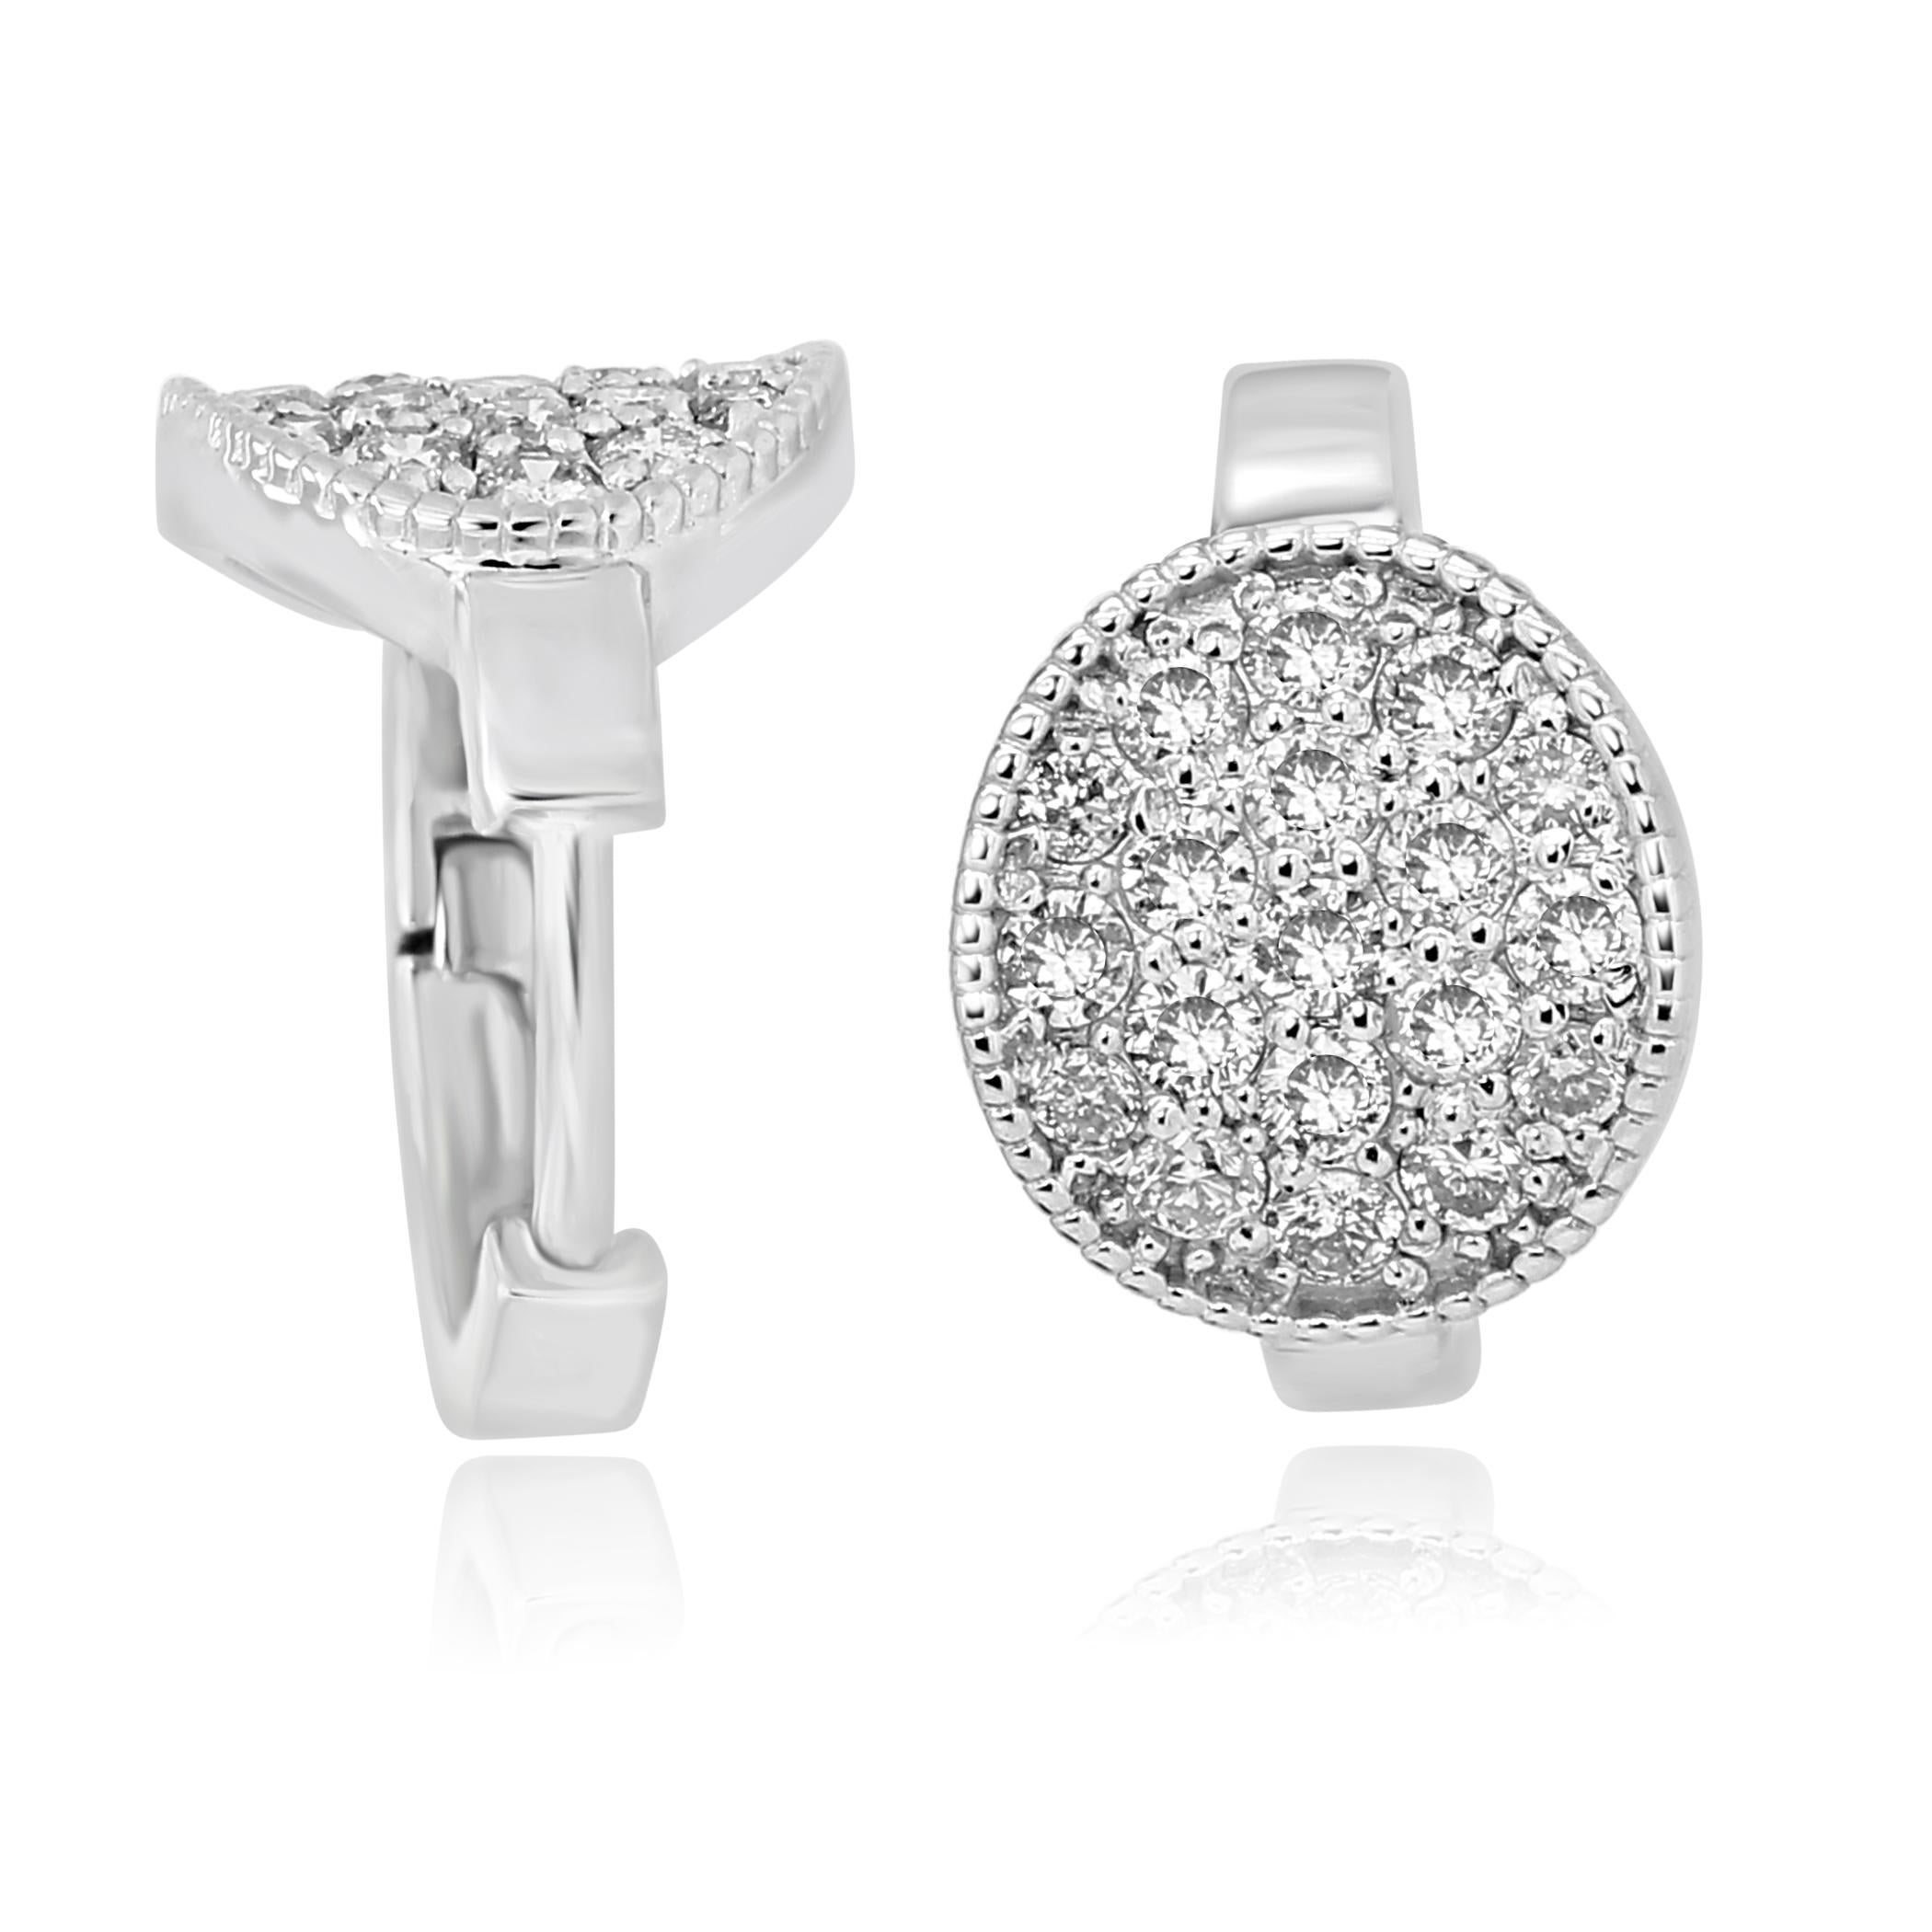 Stunning every day wear 14K White Gold Clip on Earring with White Diamond Round 0.64 Carat with Filigree on the side.

MADE IN USA 